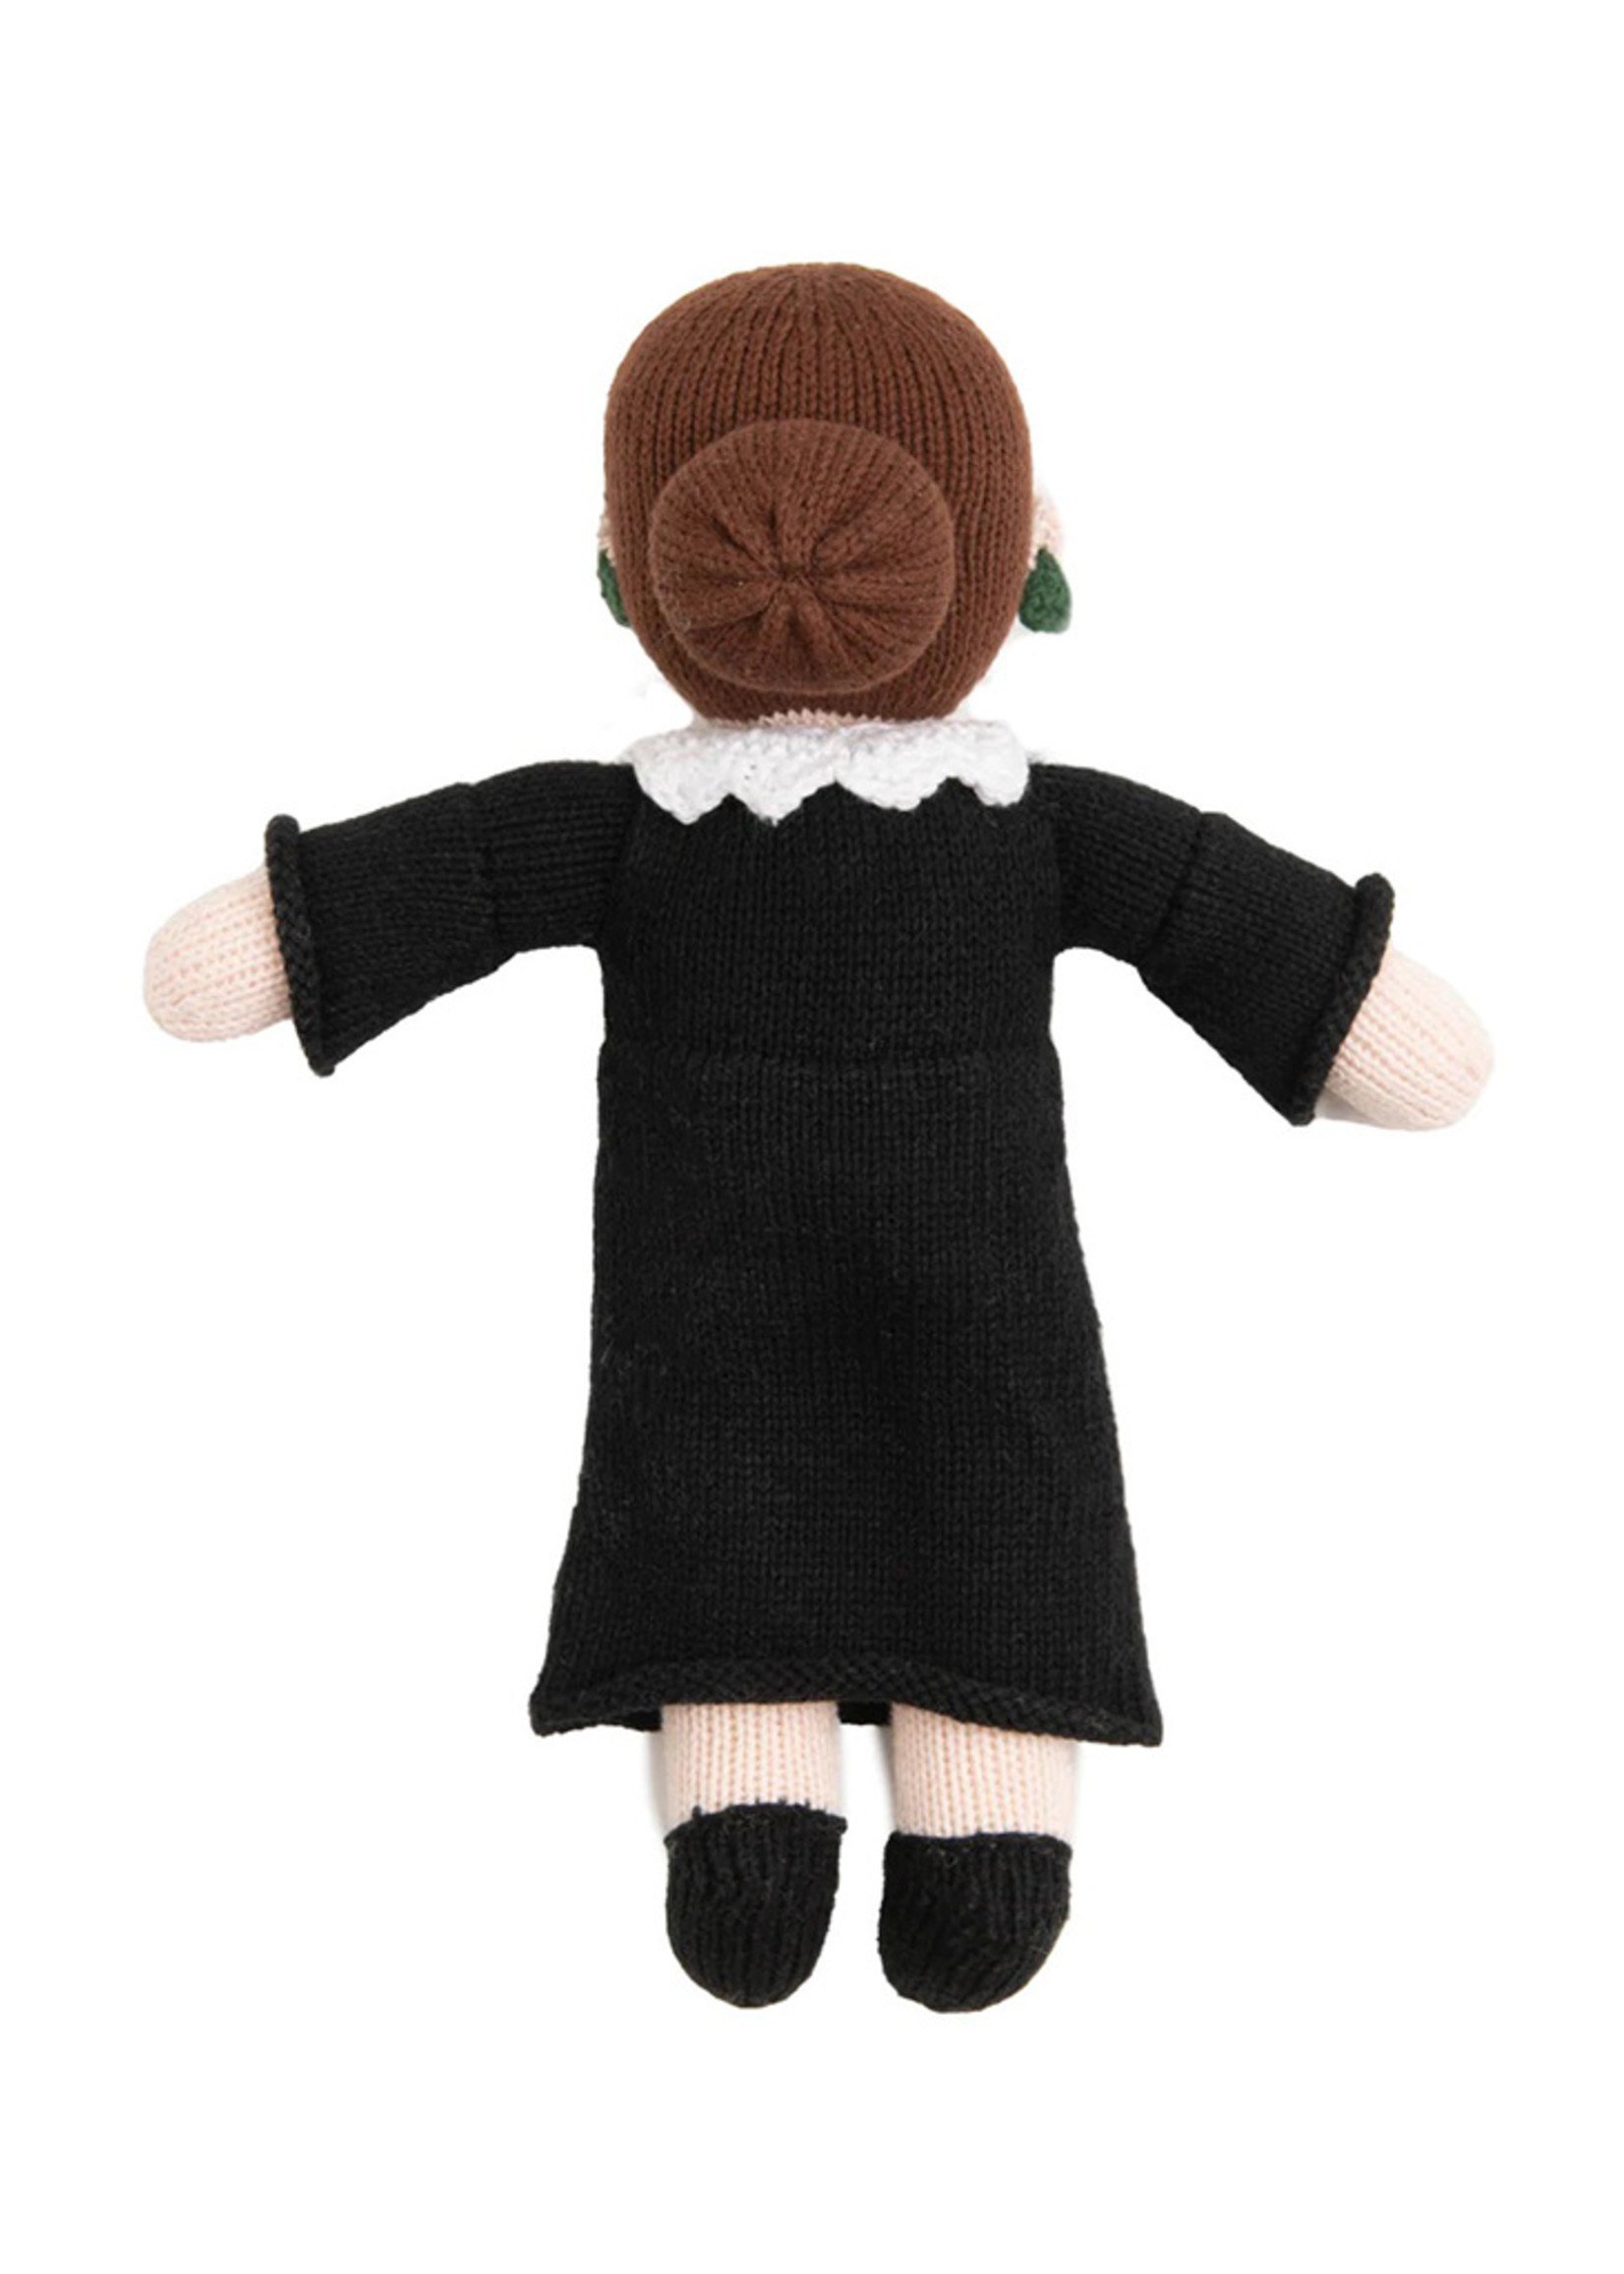 Global Goods Partners Ruth Bader Ginsberg Knit Toy Doll